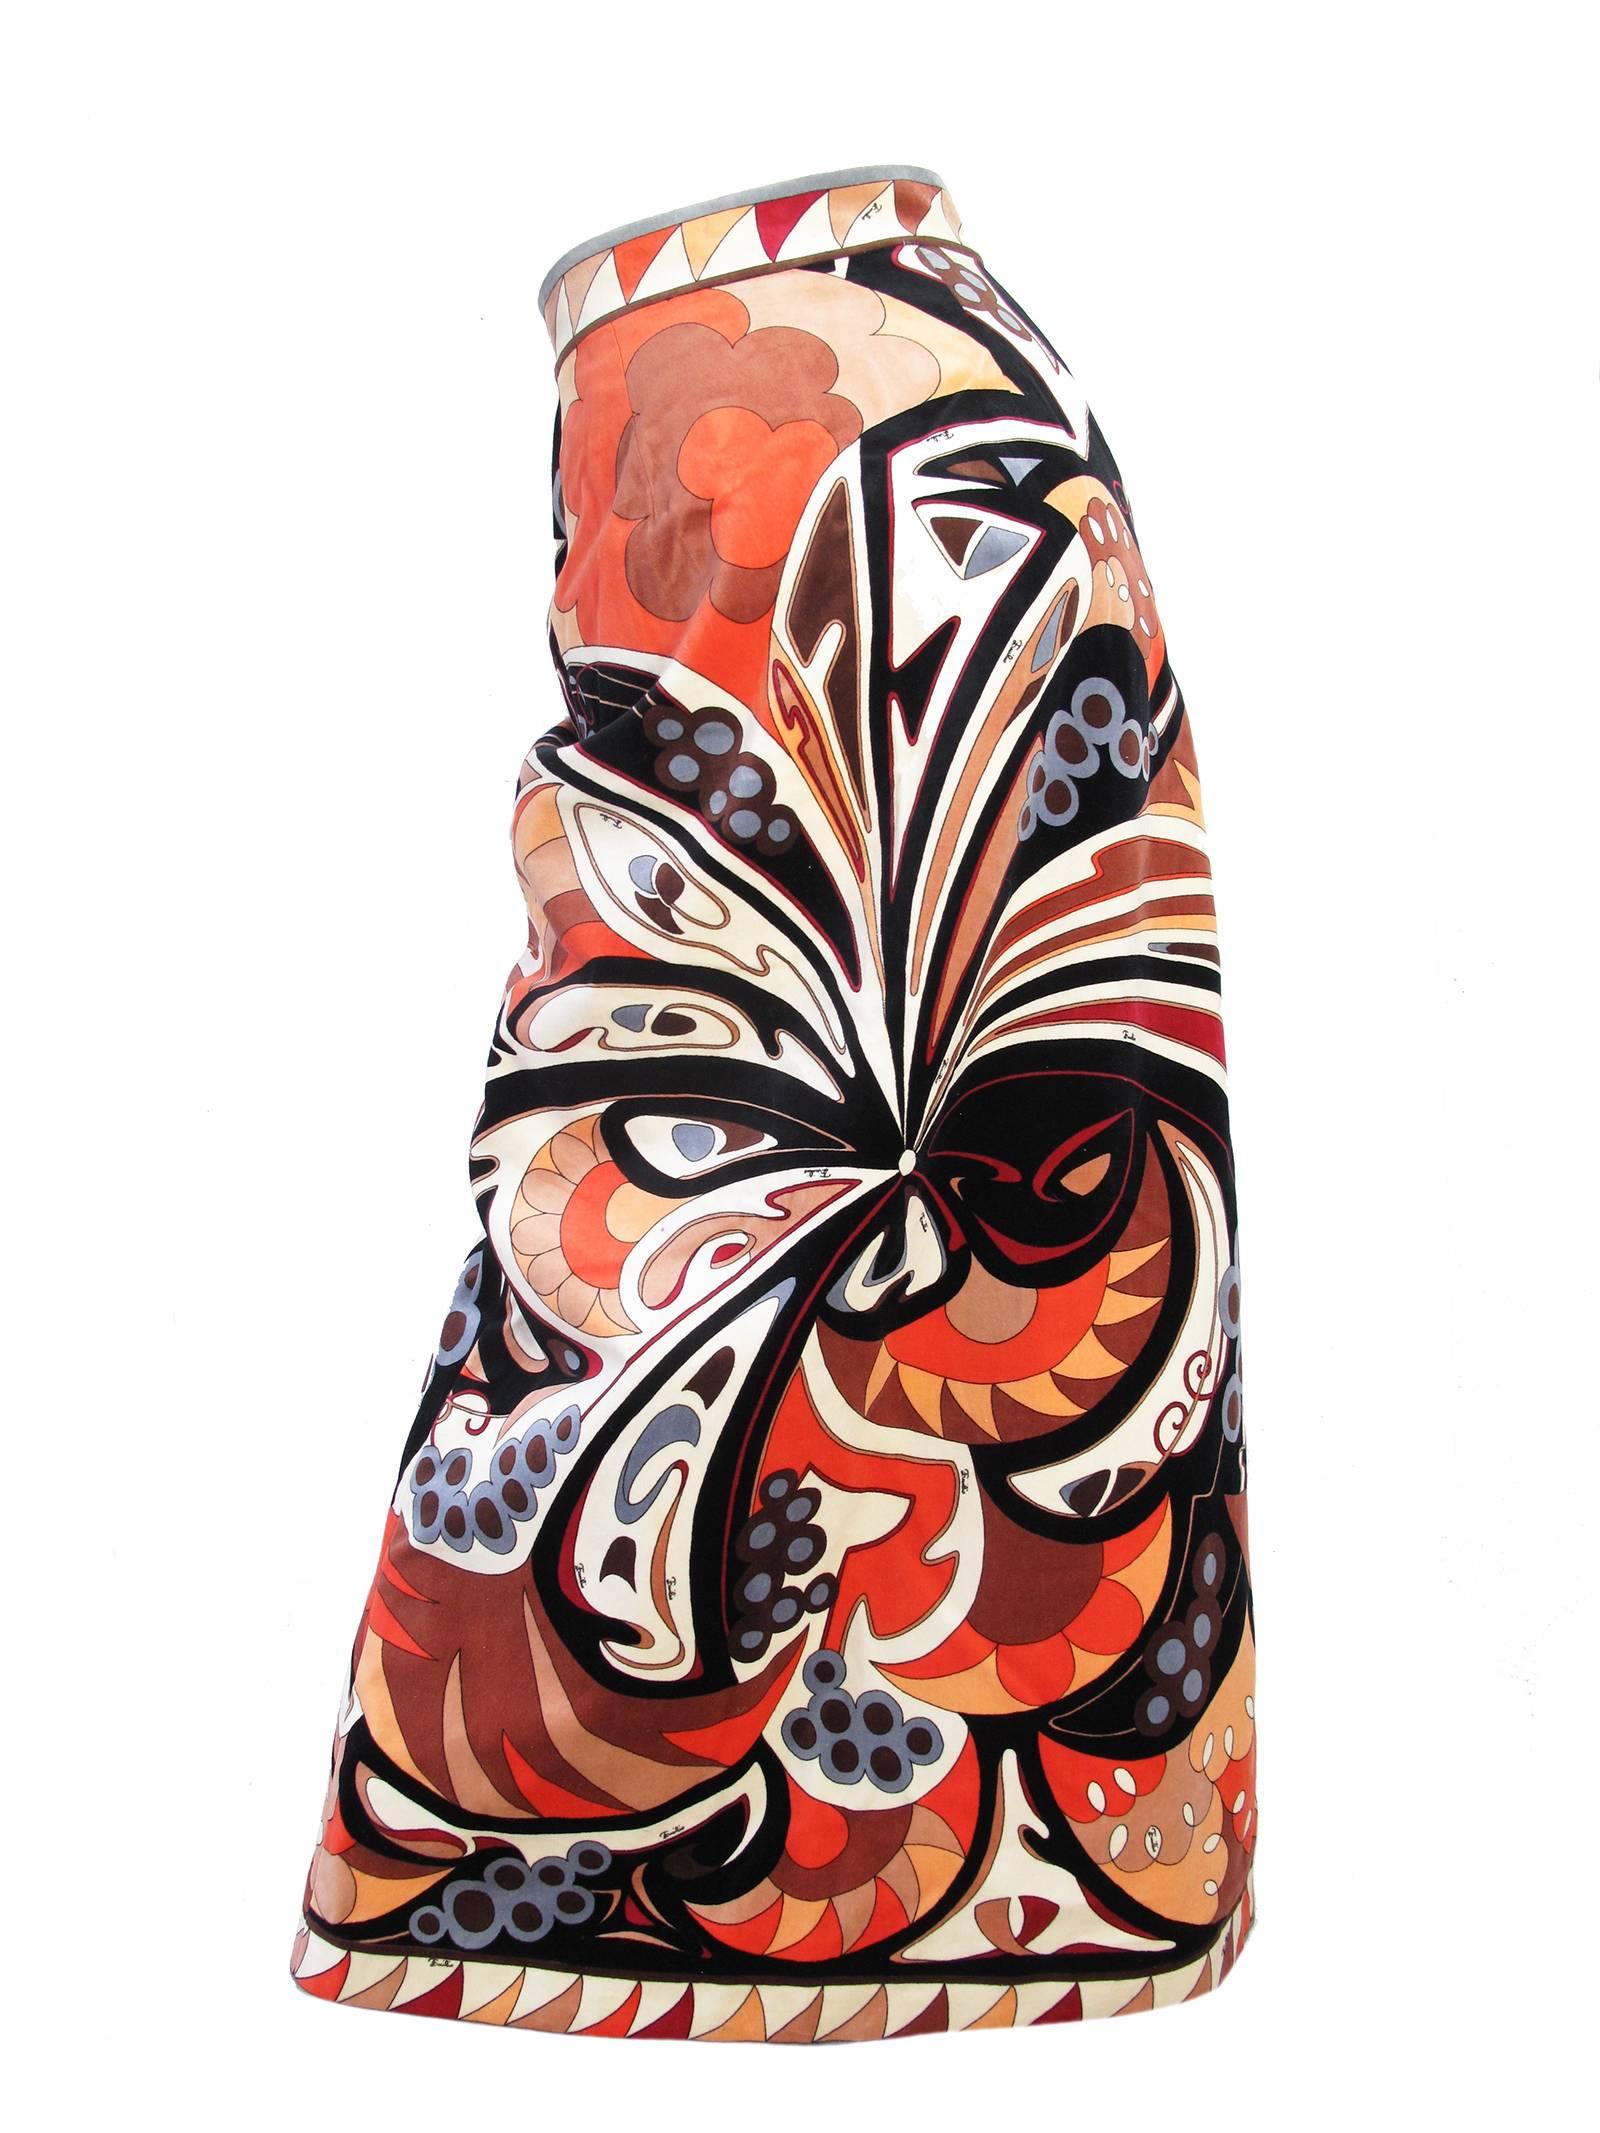 1970s Pucci velvet geometric printed skirt with zipper down front.  Condition: Good, a few spots, see photos.  Label size 10 but fits current size US 6

We accept returns for refund, please see our terms.  We offer free ground shipping within the